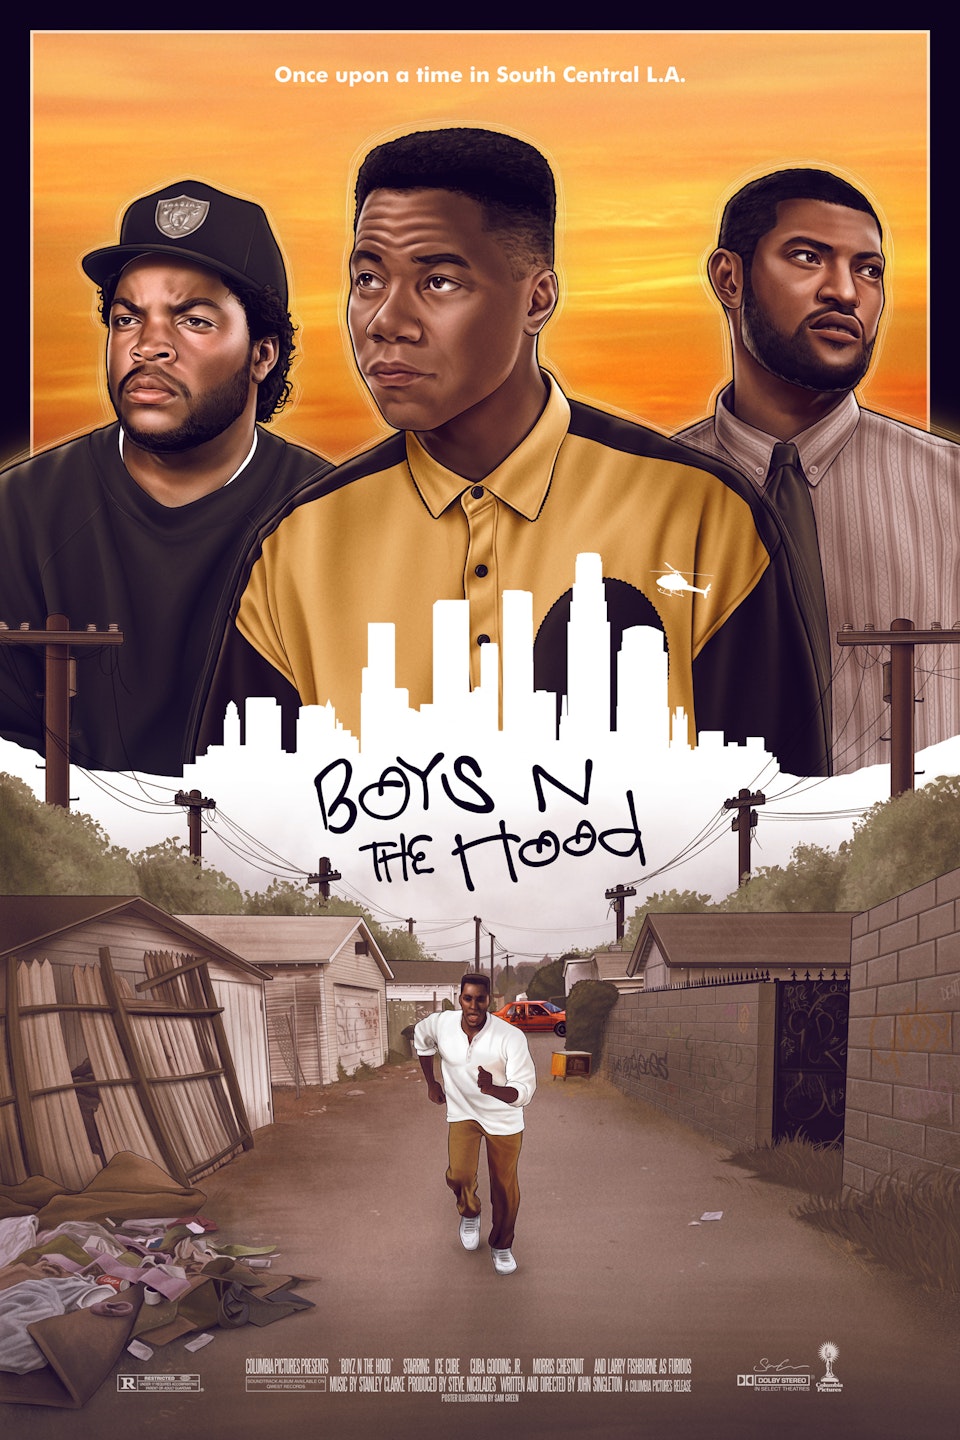 Boyz N The Hood - Boyz N The Hood Poster Illustration

Illustrated components in Procreate, Adobe Photoshop and Adobe Illustrator. Colours and assembly in Adobe Photoshop.

Created as part of Gallery 1988's exhibition “30 Years Later” – featuring artwork inspired by the films of 1991.

Boyz N The Hood is one of my favourite movies of all time, so when I was asked to take part in this show I knew immediately which movie I wanted to make art for.